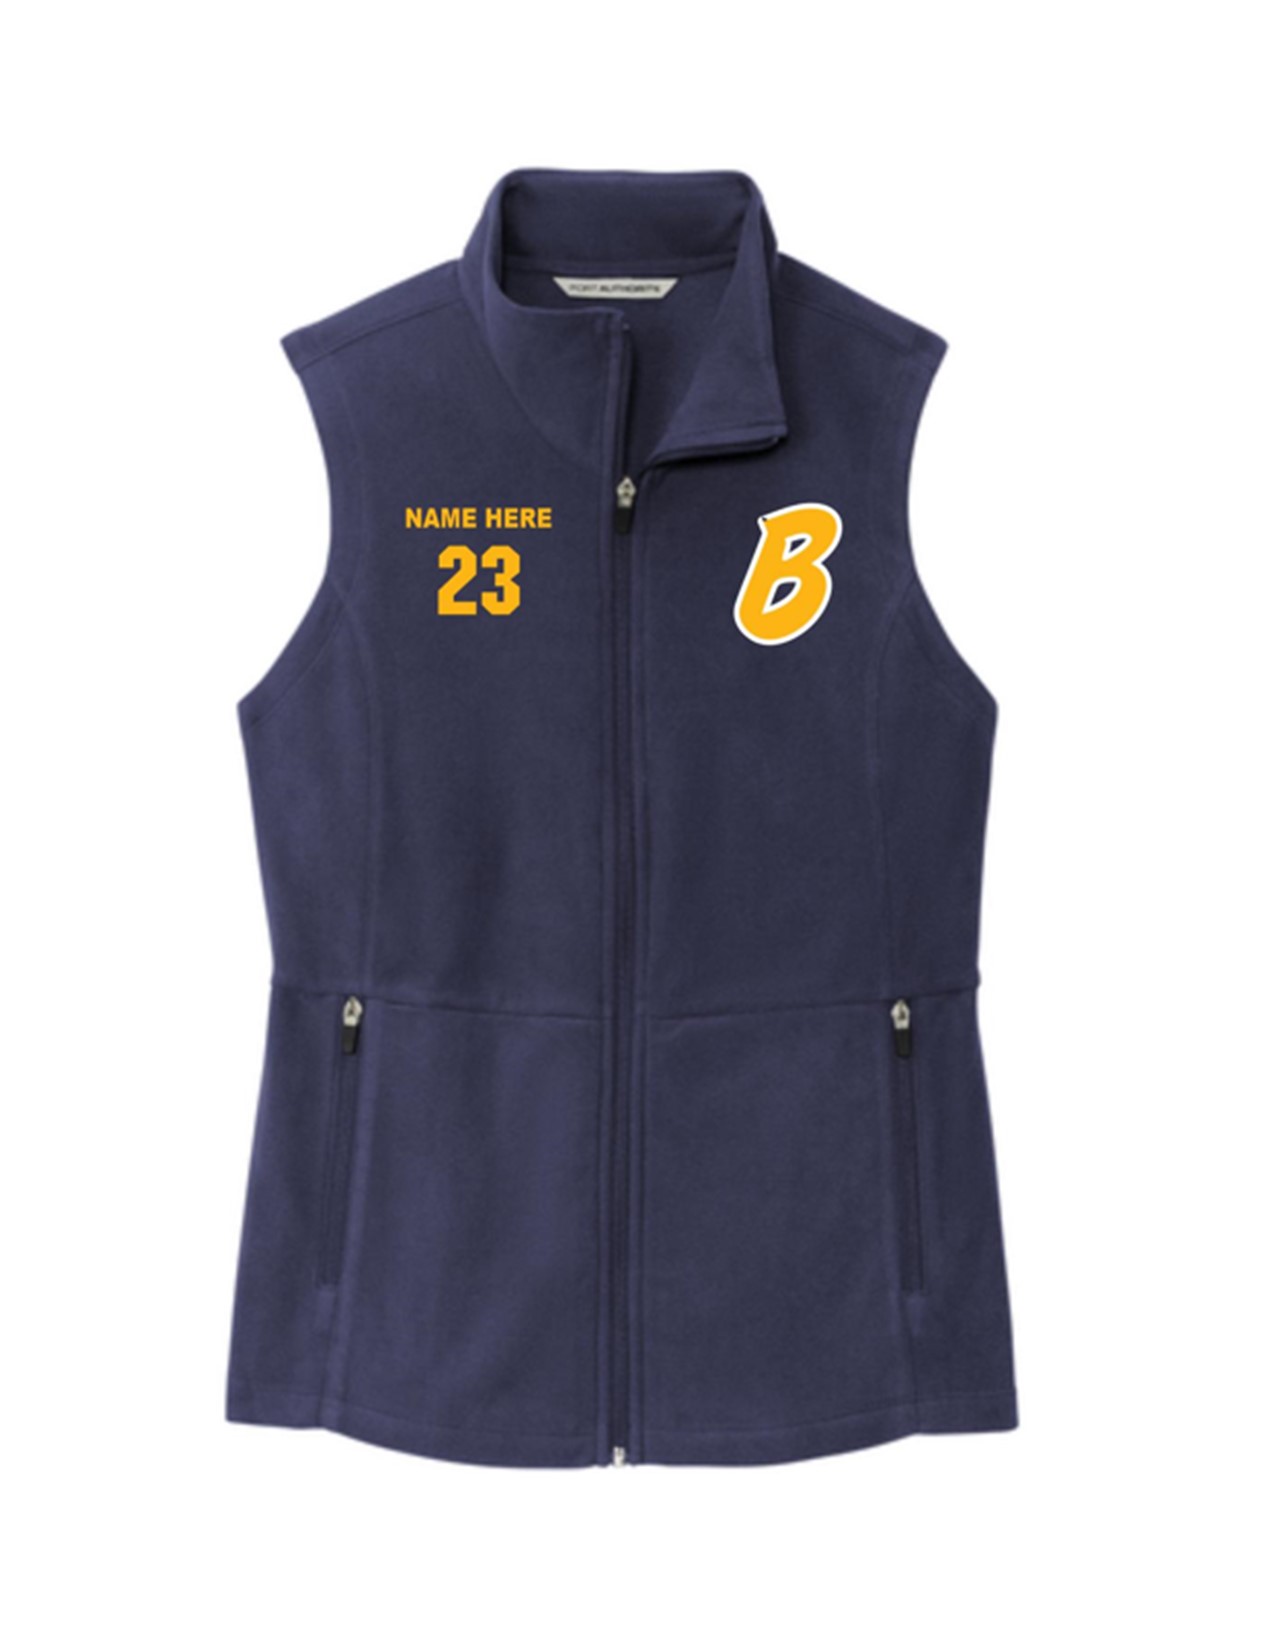 95 Port Authority L152 Ladies Accord Microfleece Vest with Embroidery